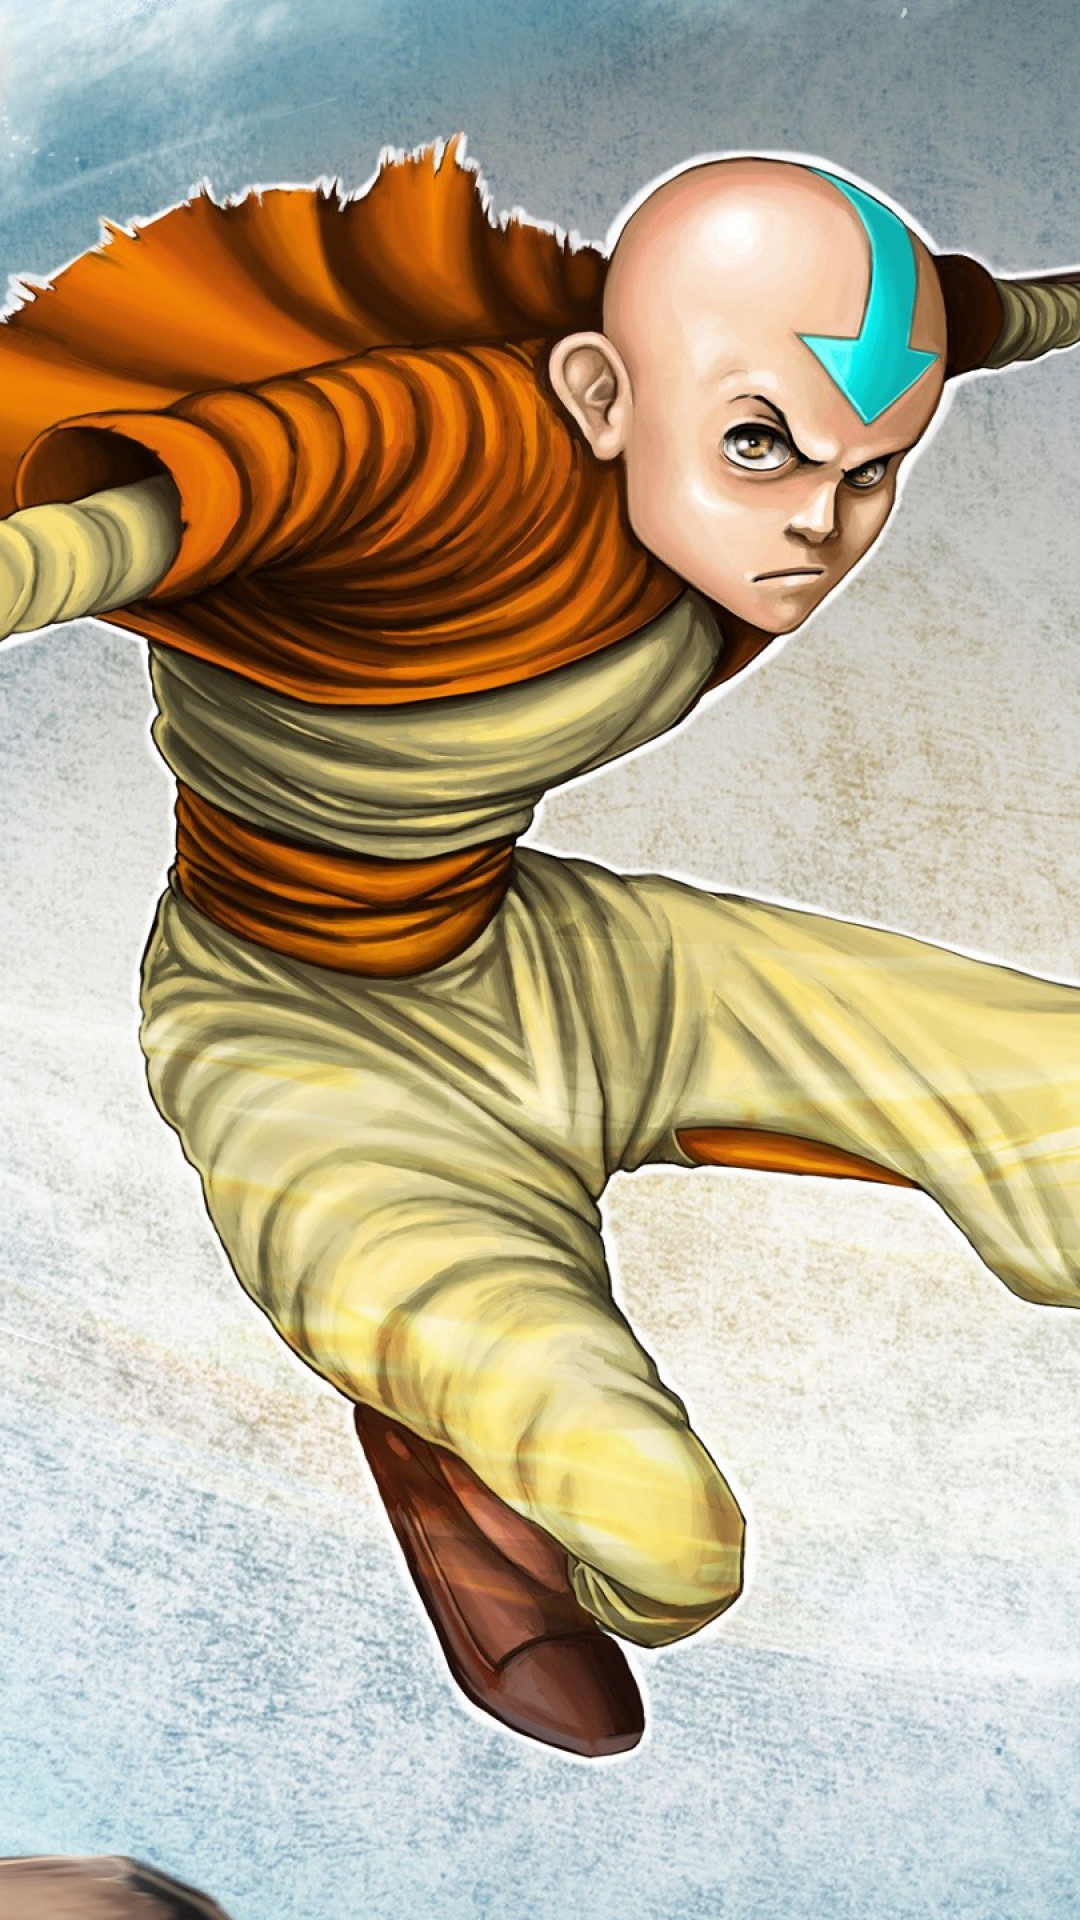 Avatar The Last Airbender Wallpaper For Android Free - Hd 4k Avatar The Last  Airbender - 1080x1920 Wallpaper 